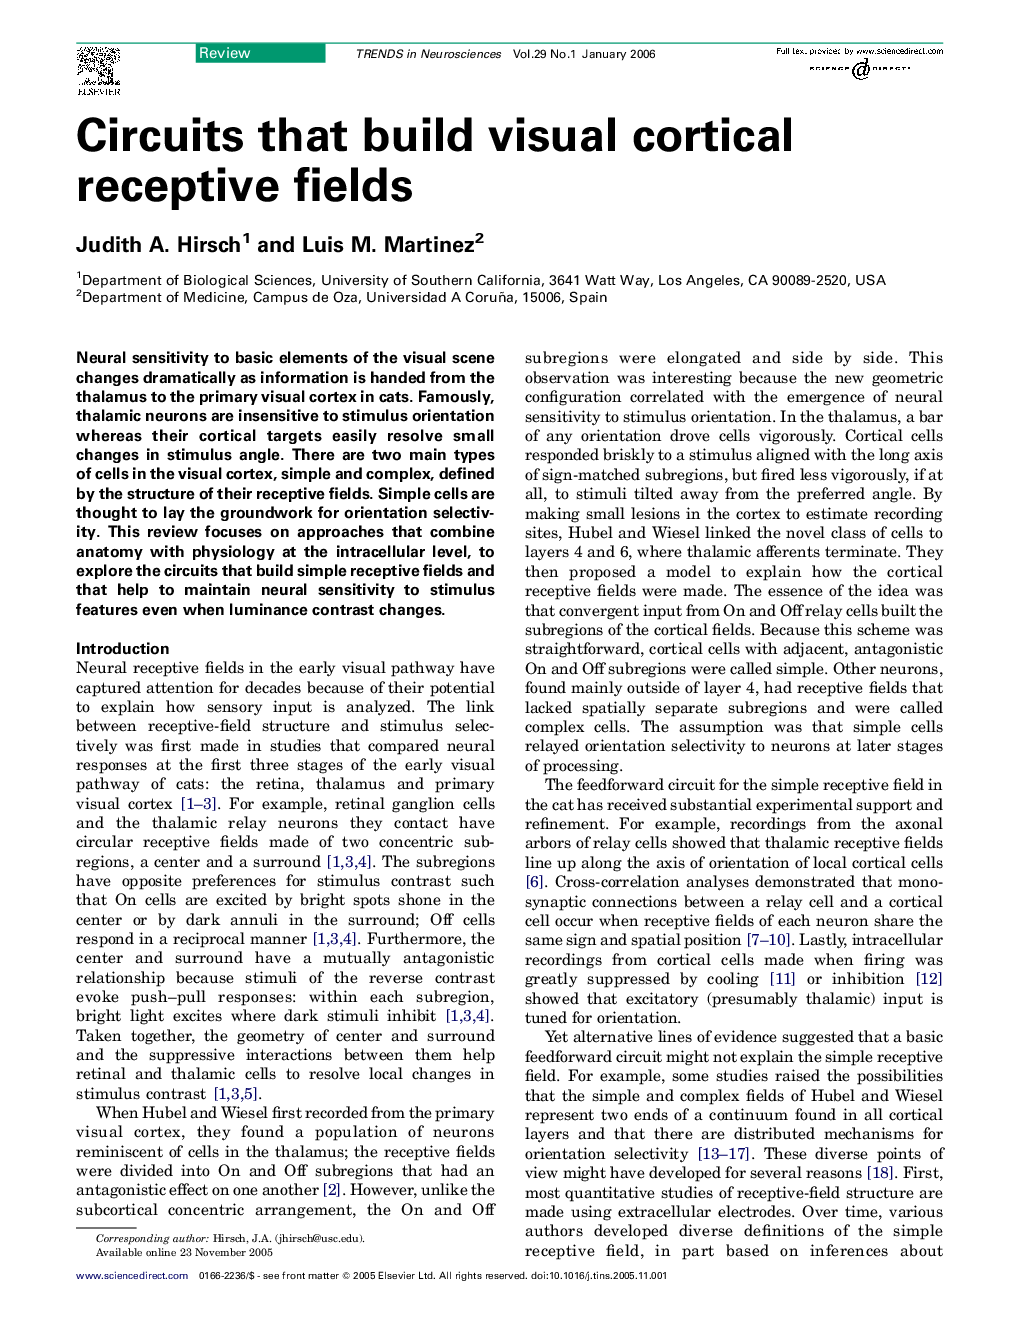 Circuits that build visual cortical receptive fields